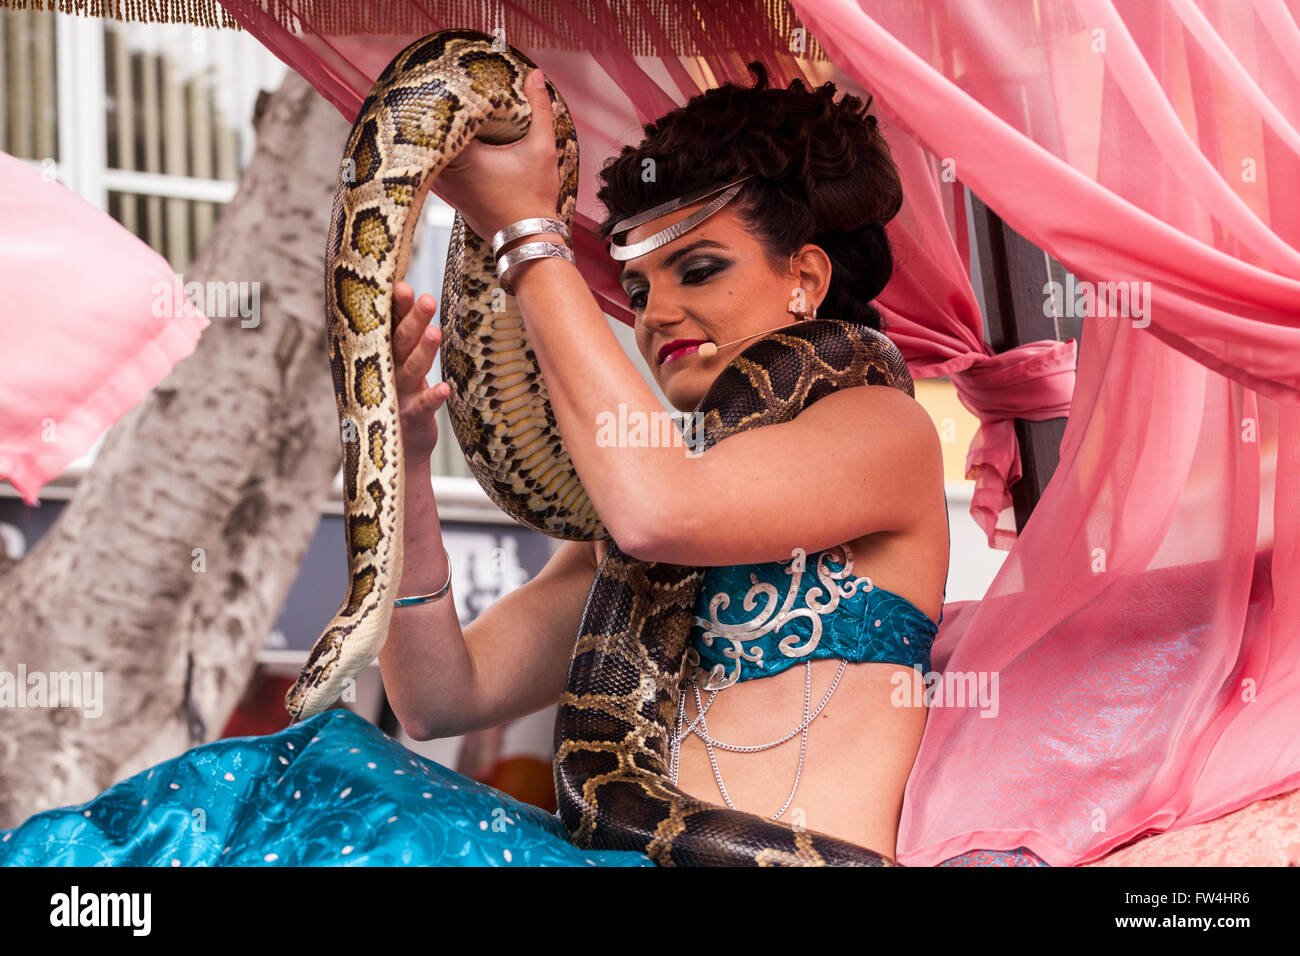 Actress playing Salome with a live boa constrictor snake in the Passion play, Adeje, Tenerife, Canary Islands, Spain. Representa Stock Photo